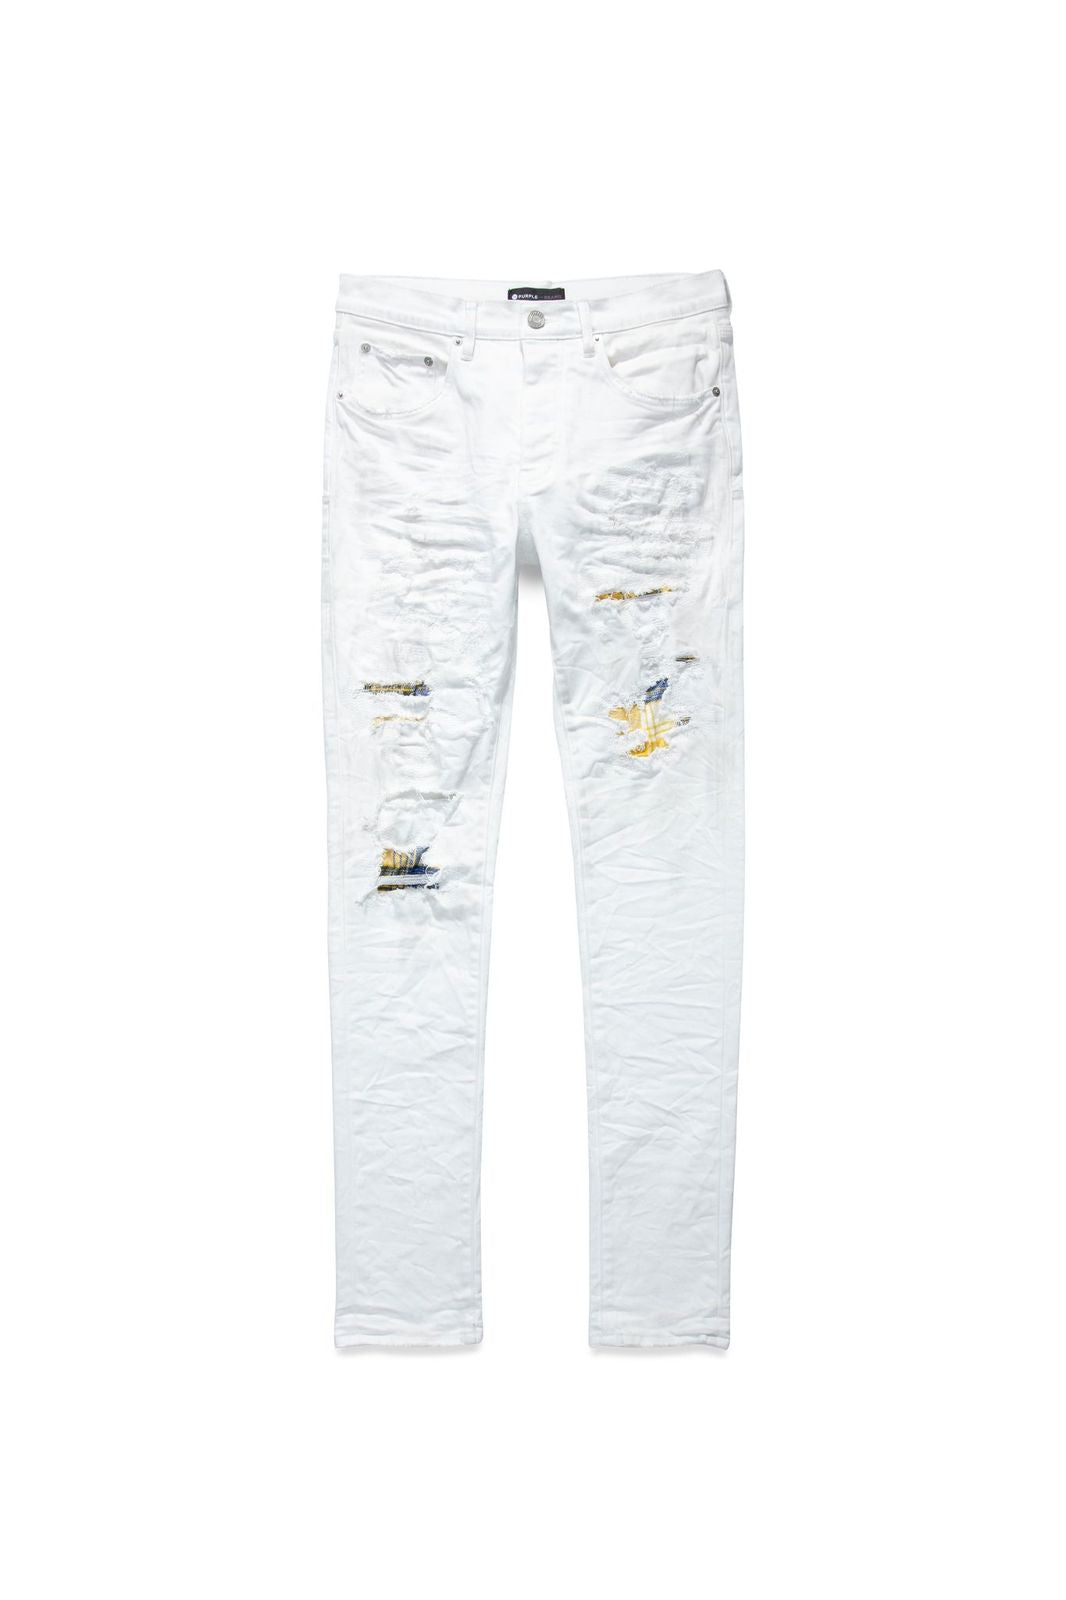 Purple Brand P001 Low Rise Skinny Jeans - White Heavy Repair with Plaid Patch